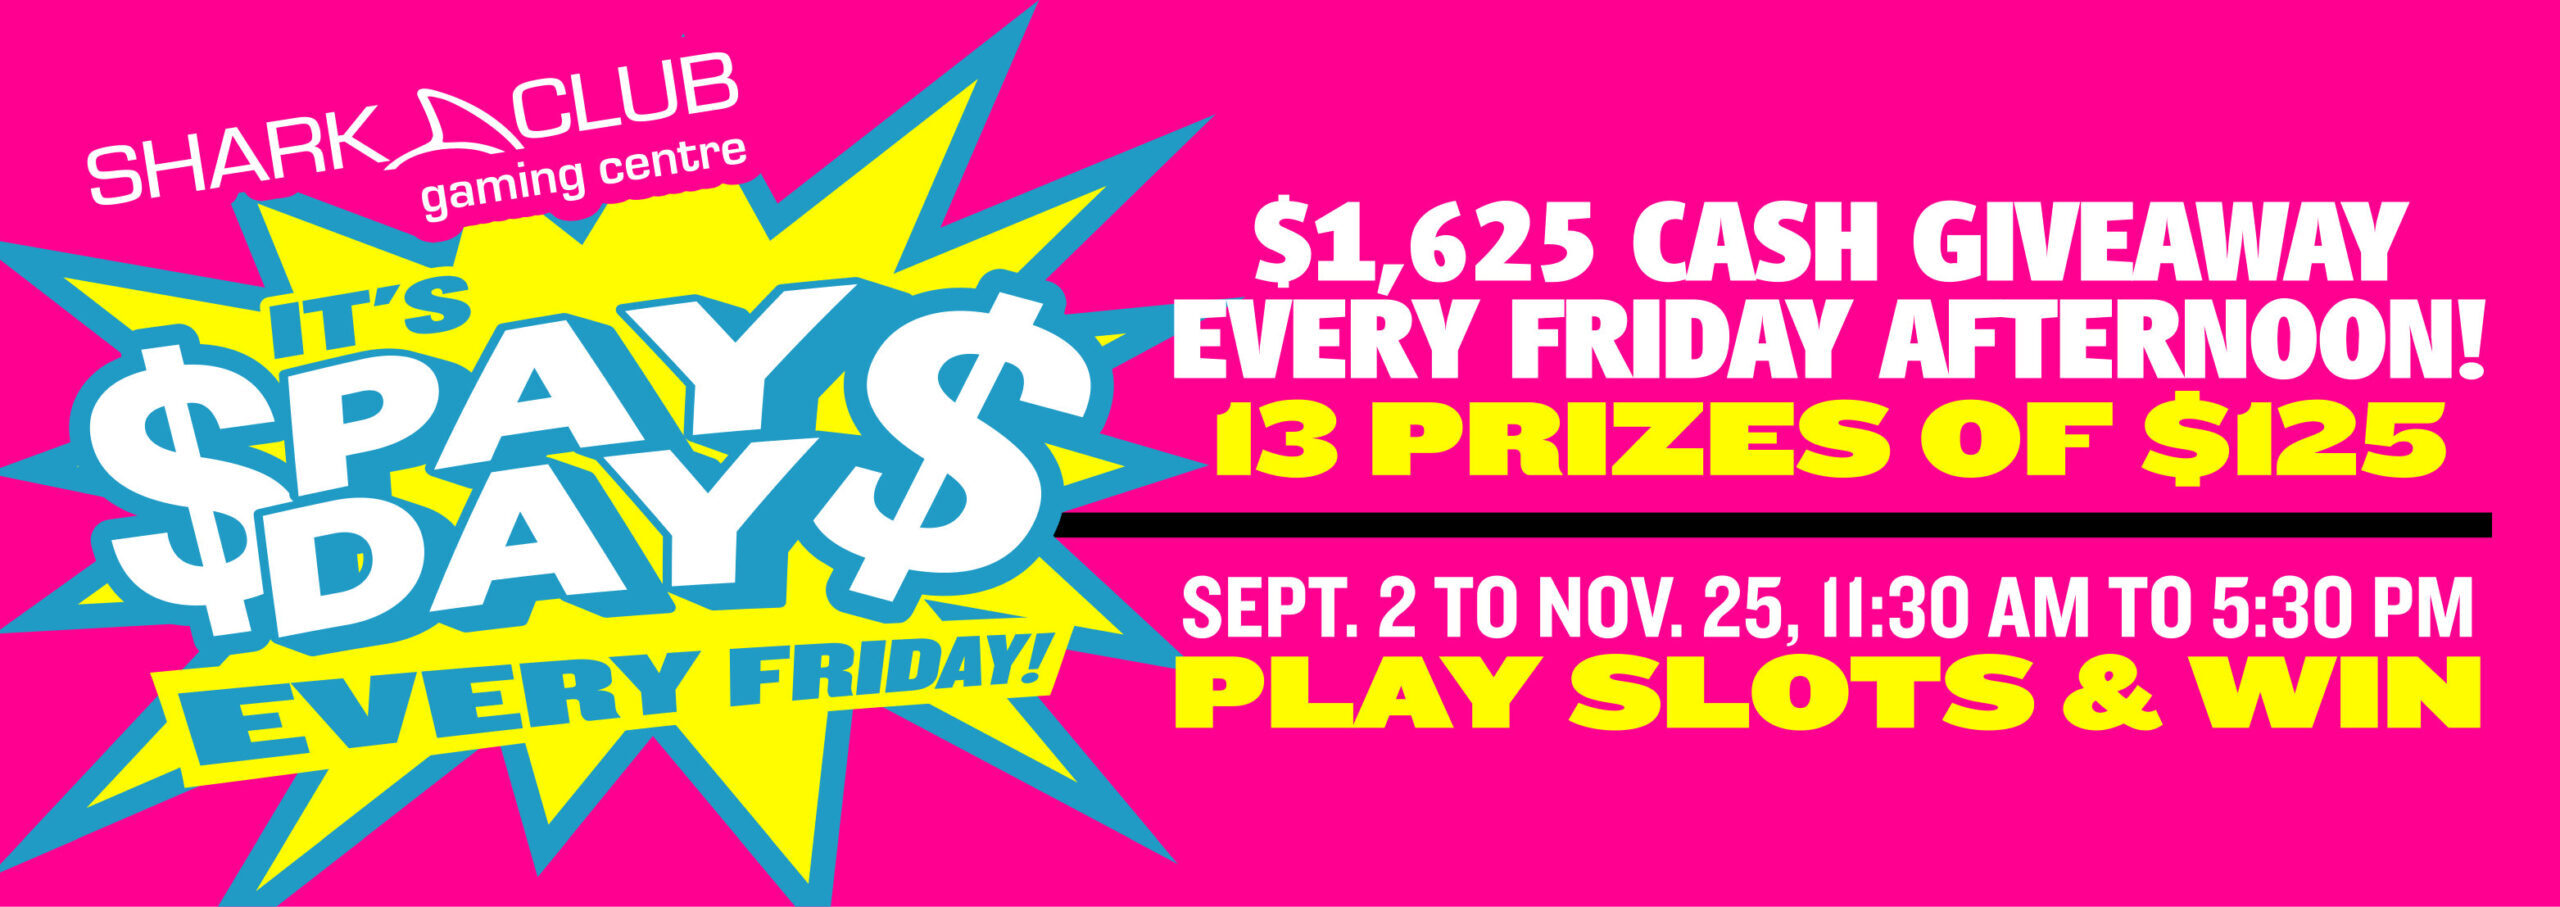 $1,625 cash giveaway every Friday afternoon! 13 Prizes of $125. September 2nd to November 25th, 11:30 am to 5:30 pm play slots & win